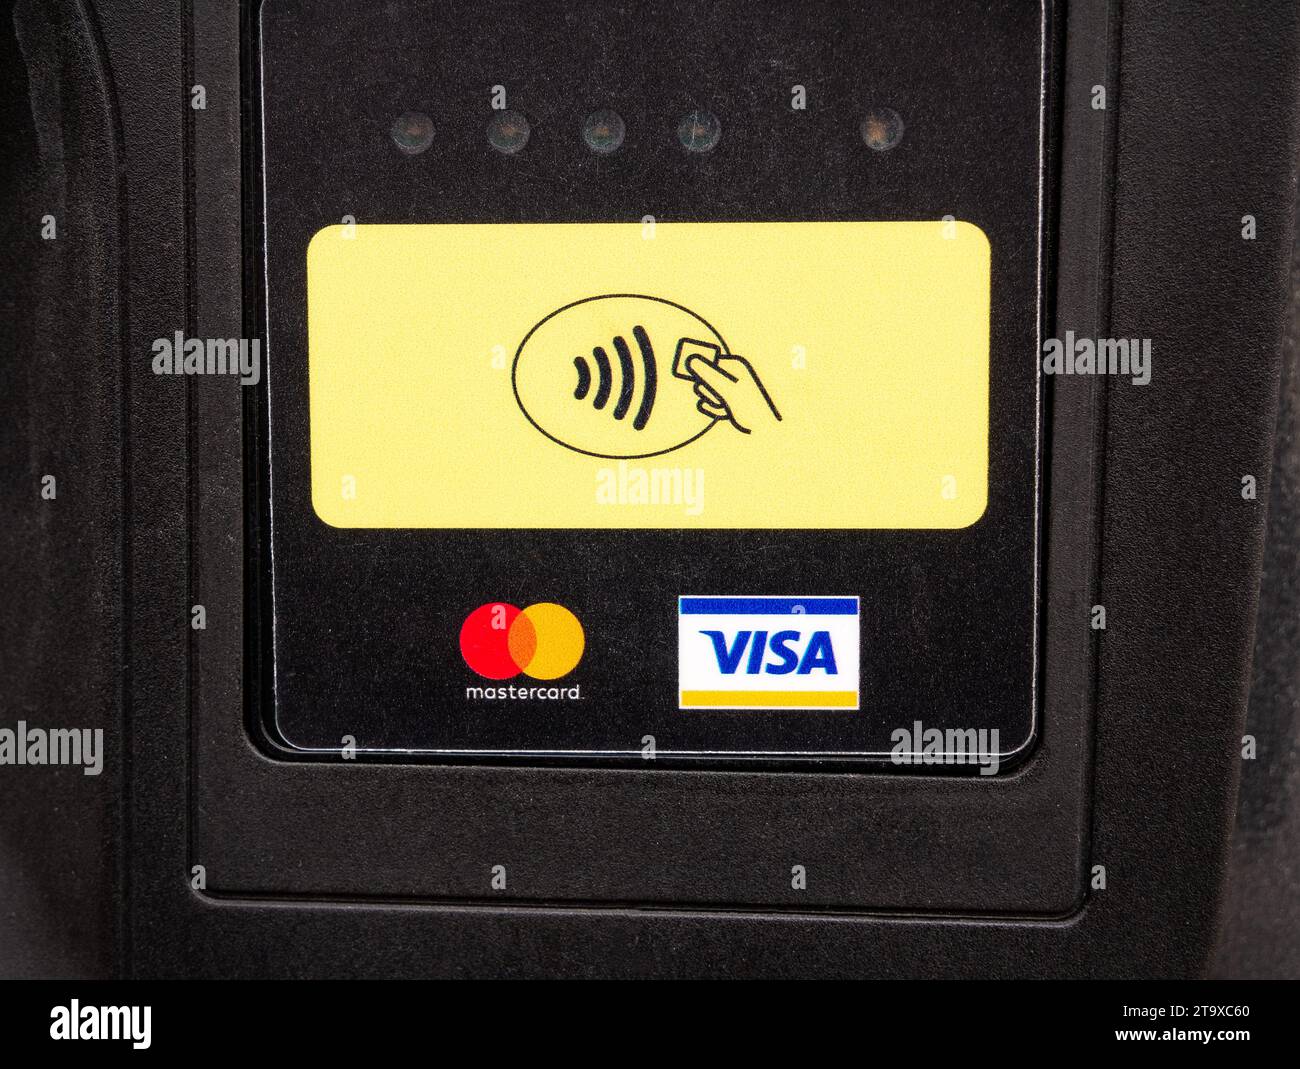 NFC card EMV contactless payment symbol on a payment terminal near MasterCard and Visa bank logos, object front view, closeup, nobody Cashless paying Stock Photo